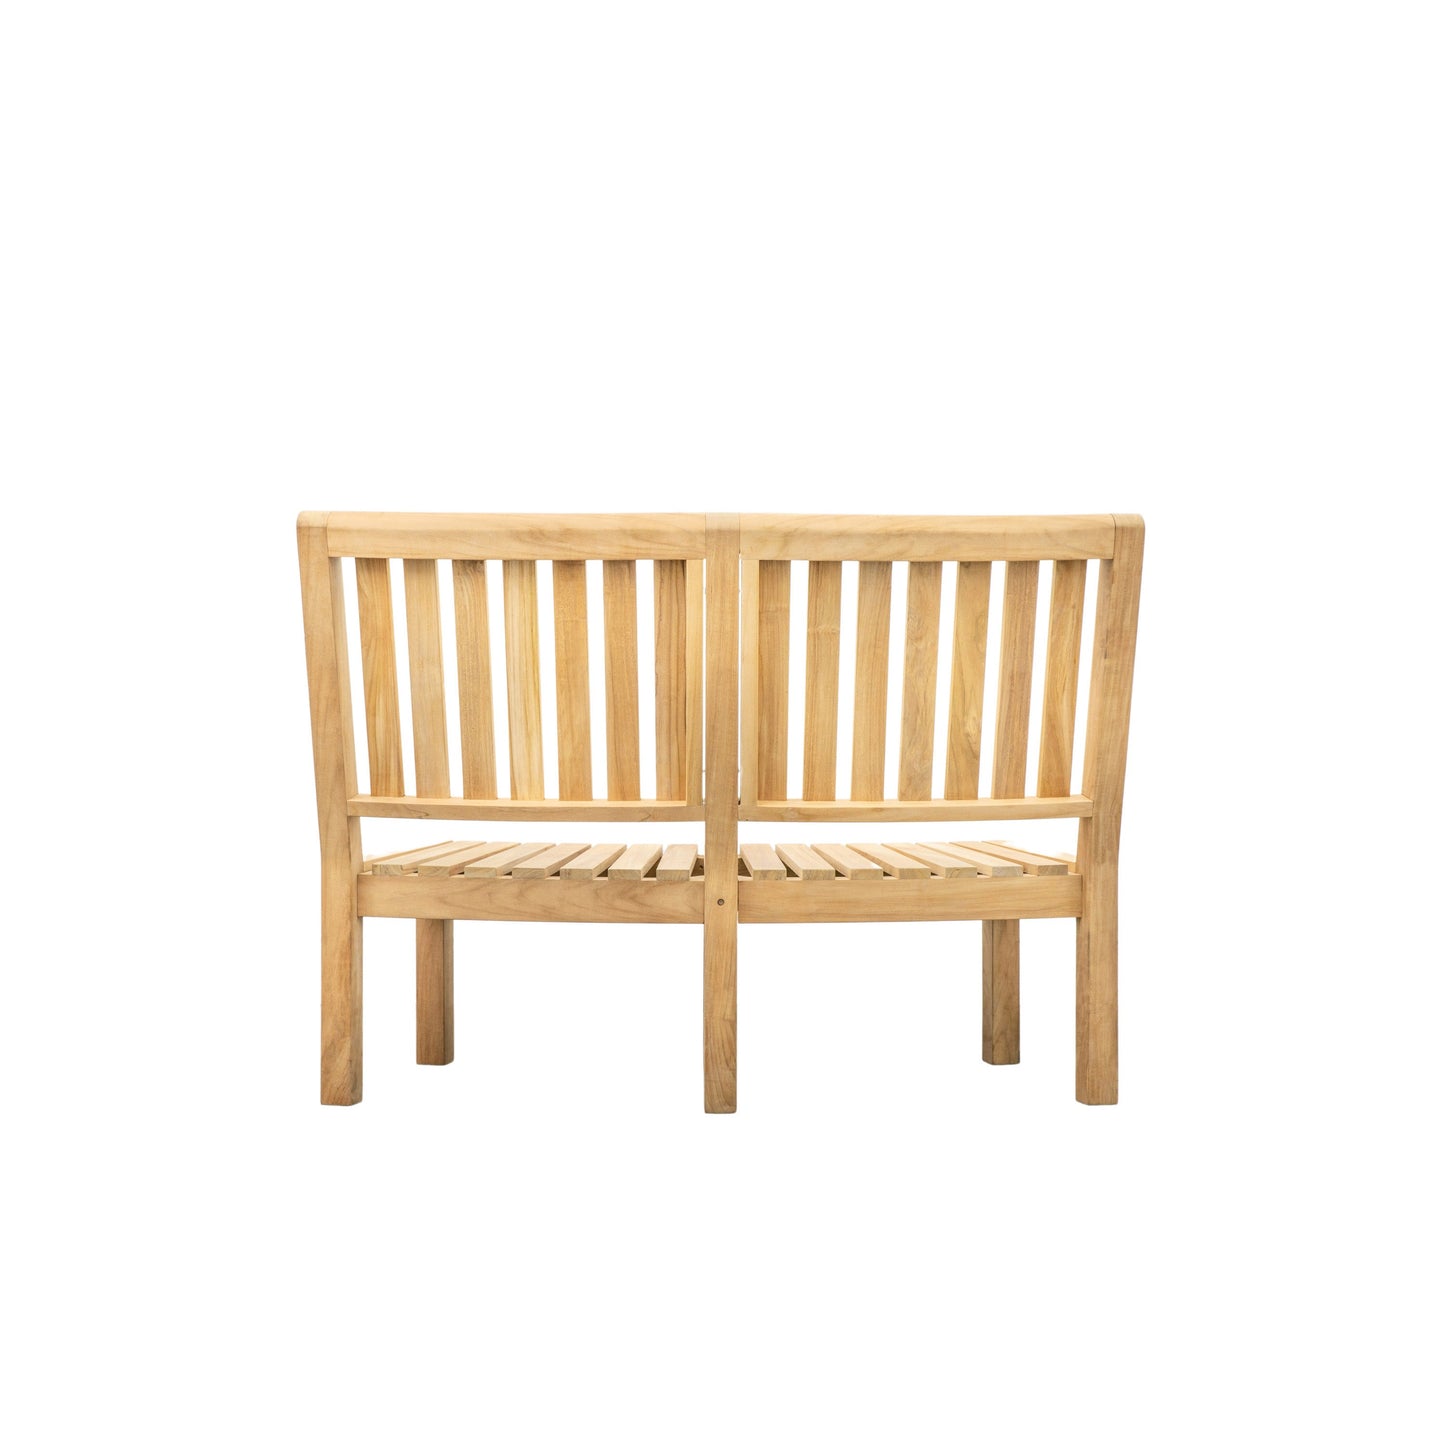 A Kikiathome.co.uk interior decor bench with two slats against a white background.